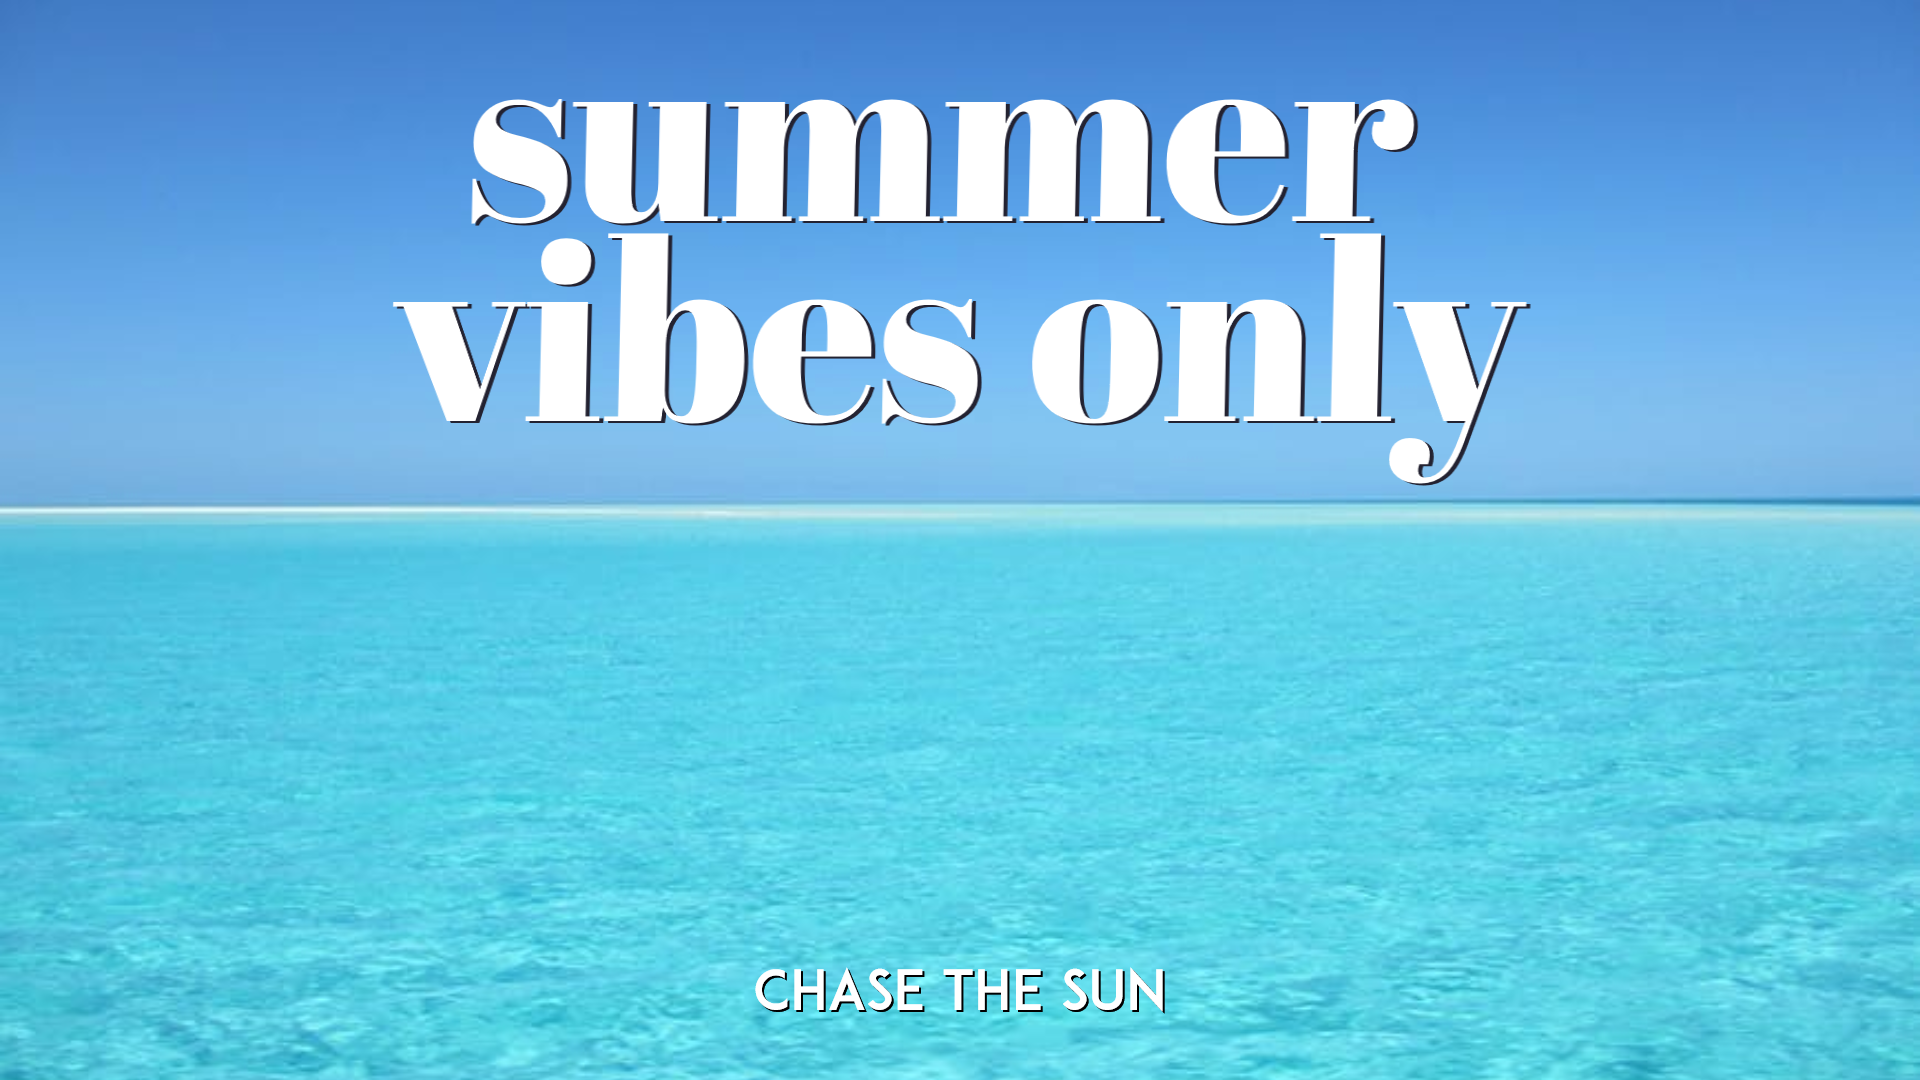 Summer vibes #fresh #summer #vibes Animation Template - #1458558